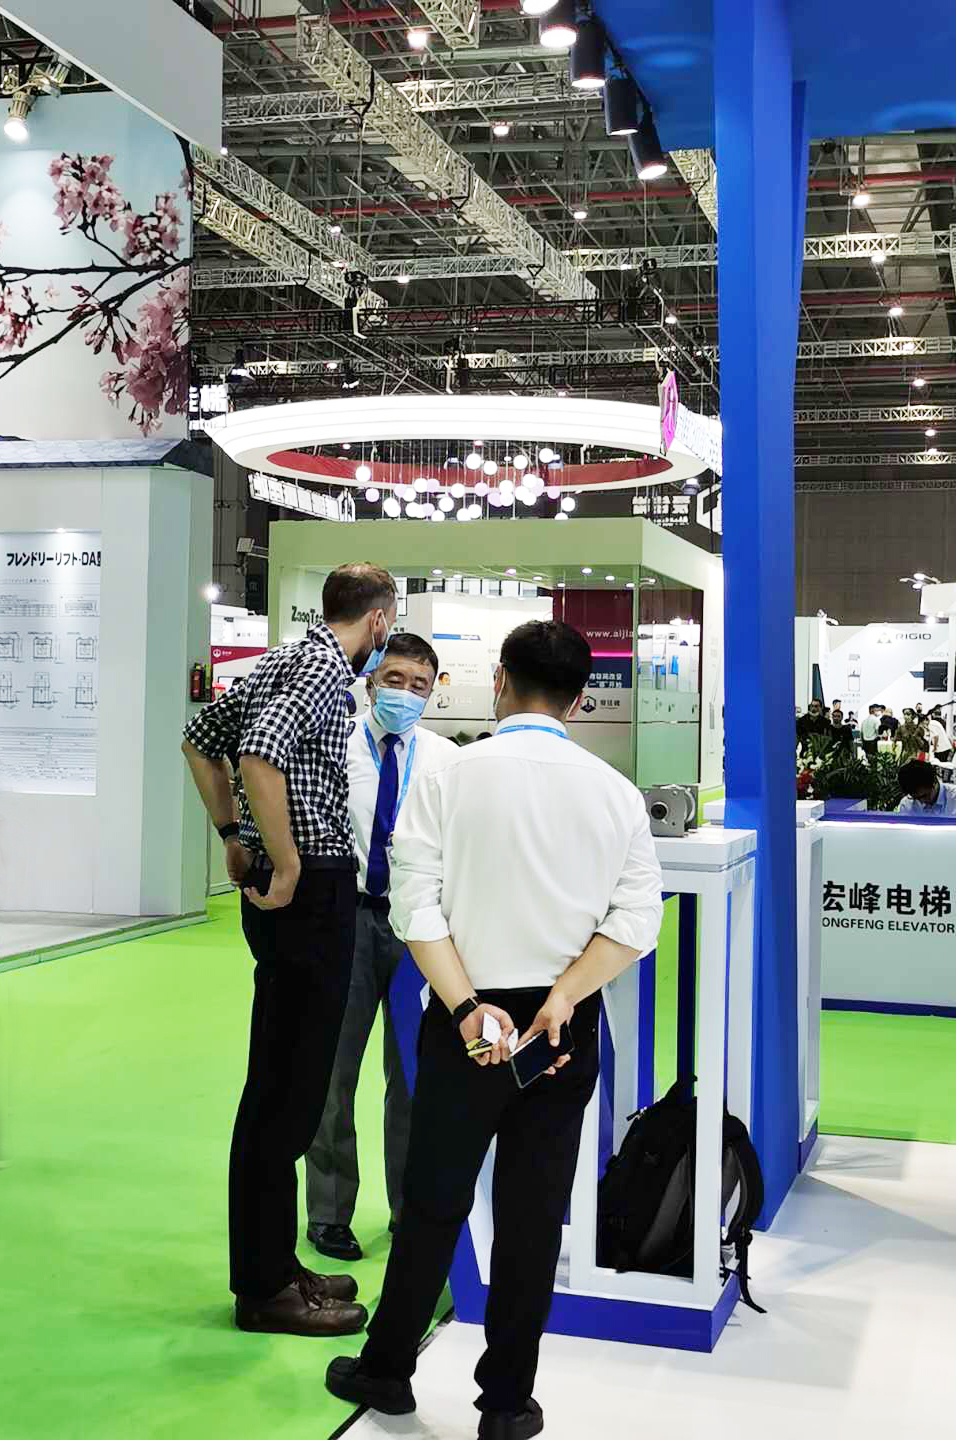 XCC GROUP CO.,LTD in the China International Elevator Exhibition 2020-2